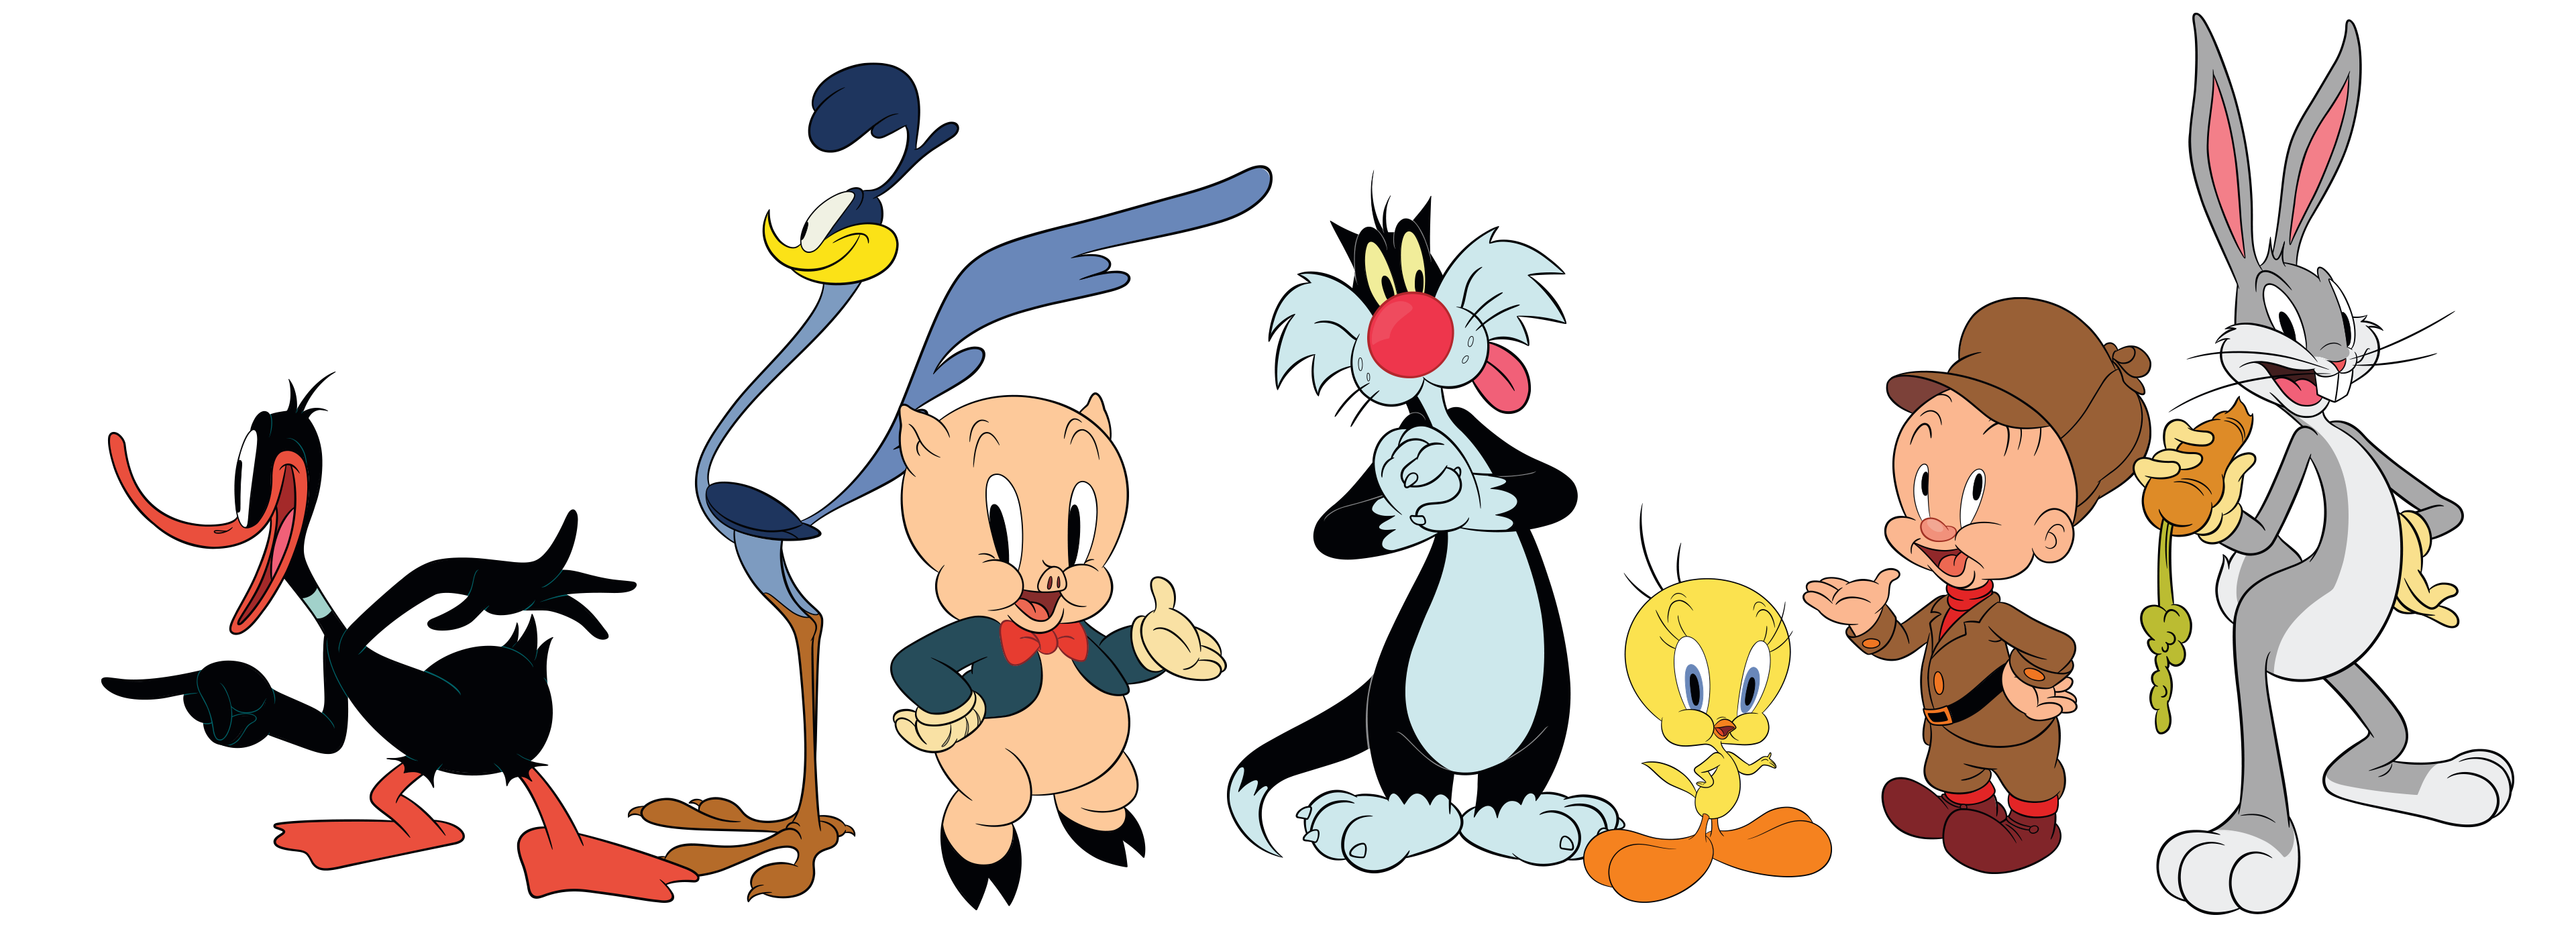 Looney Tunes Cartoons | Games, Videos, and Downloads | Cartoon Network